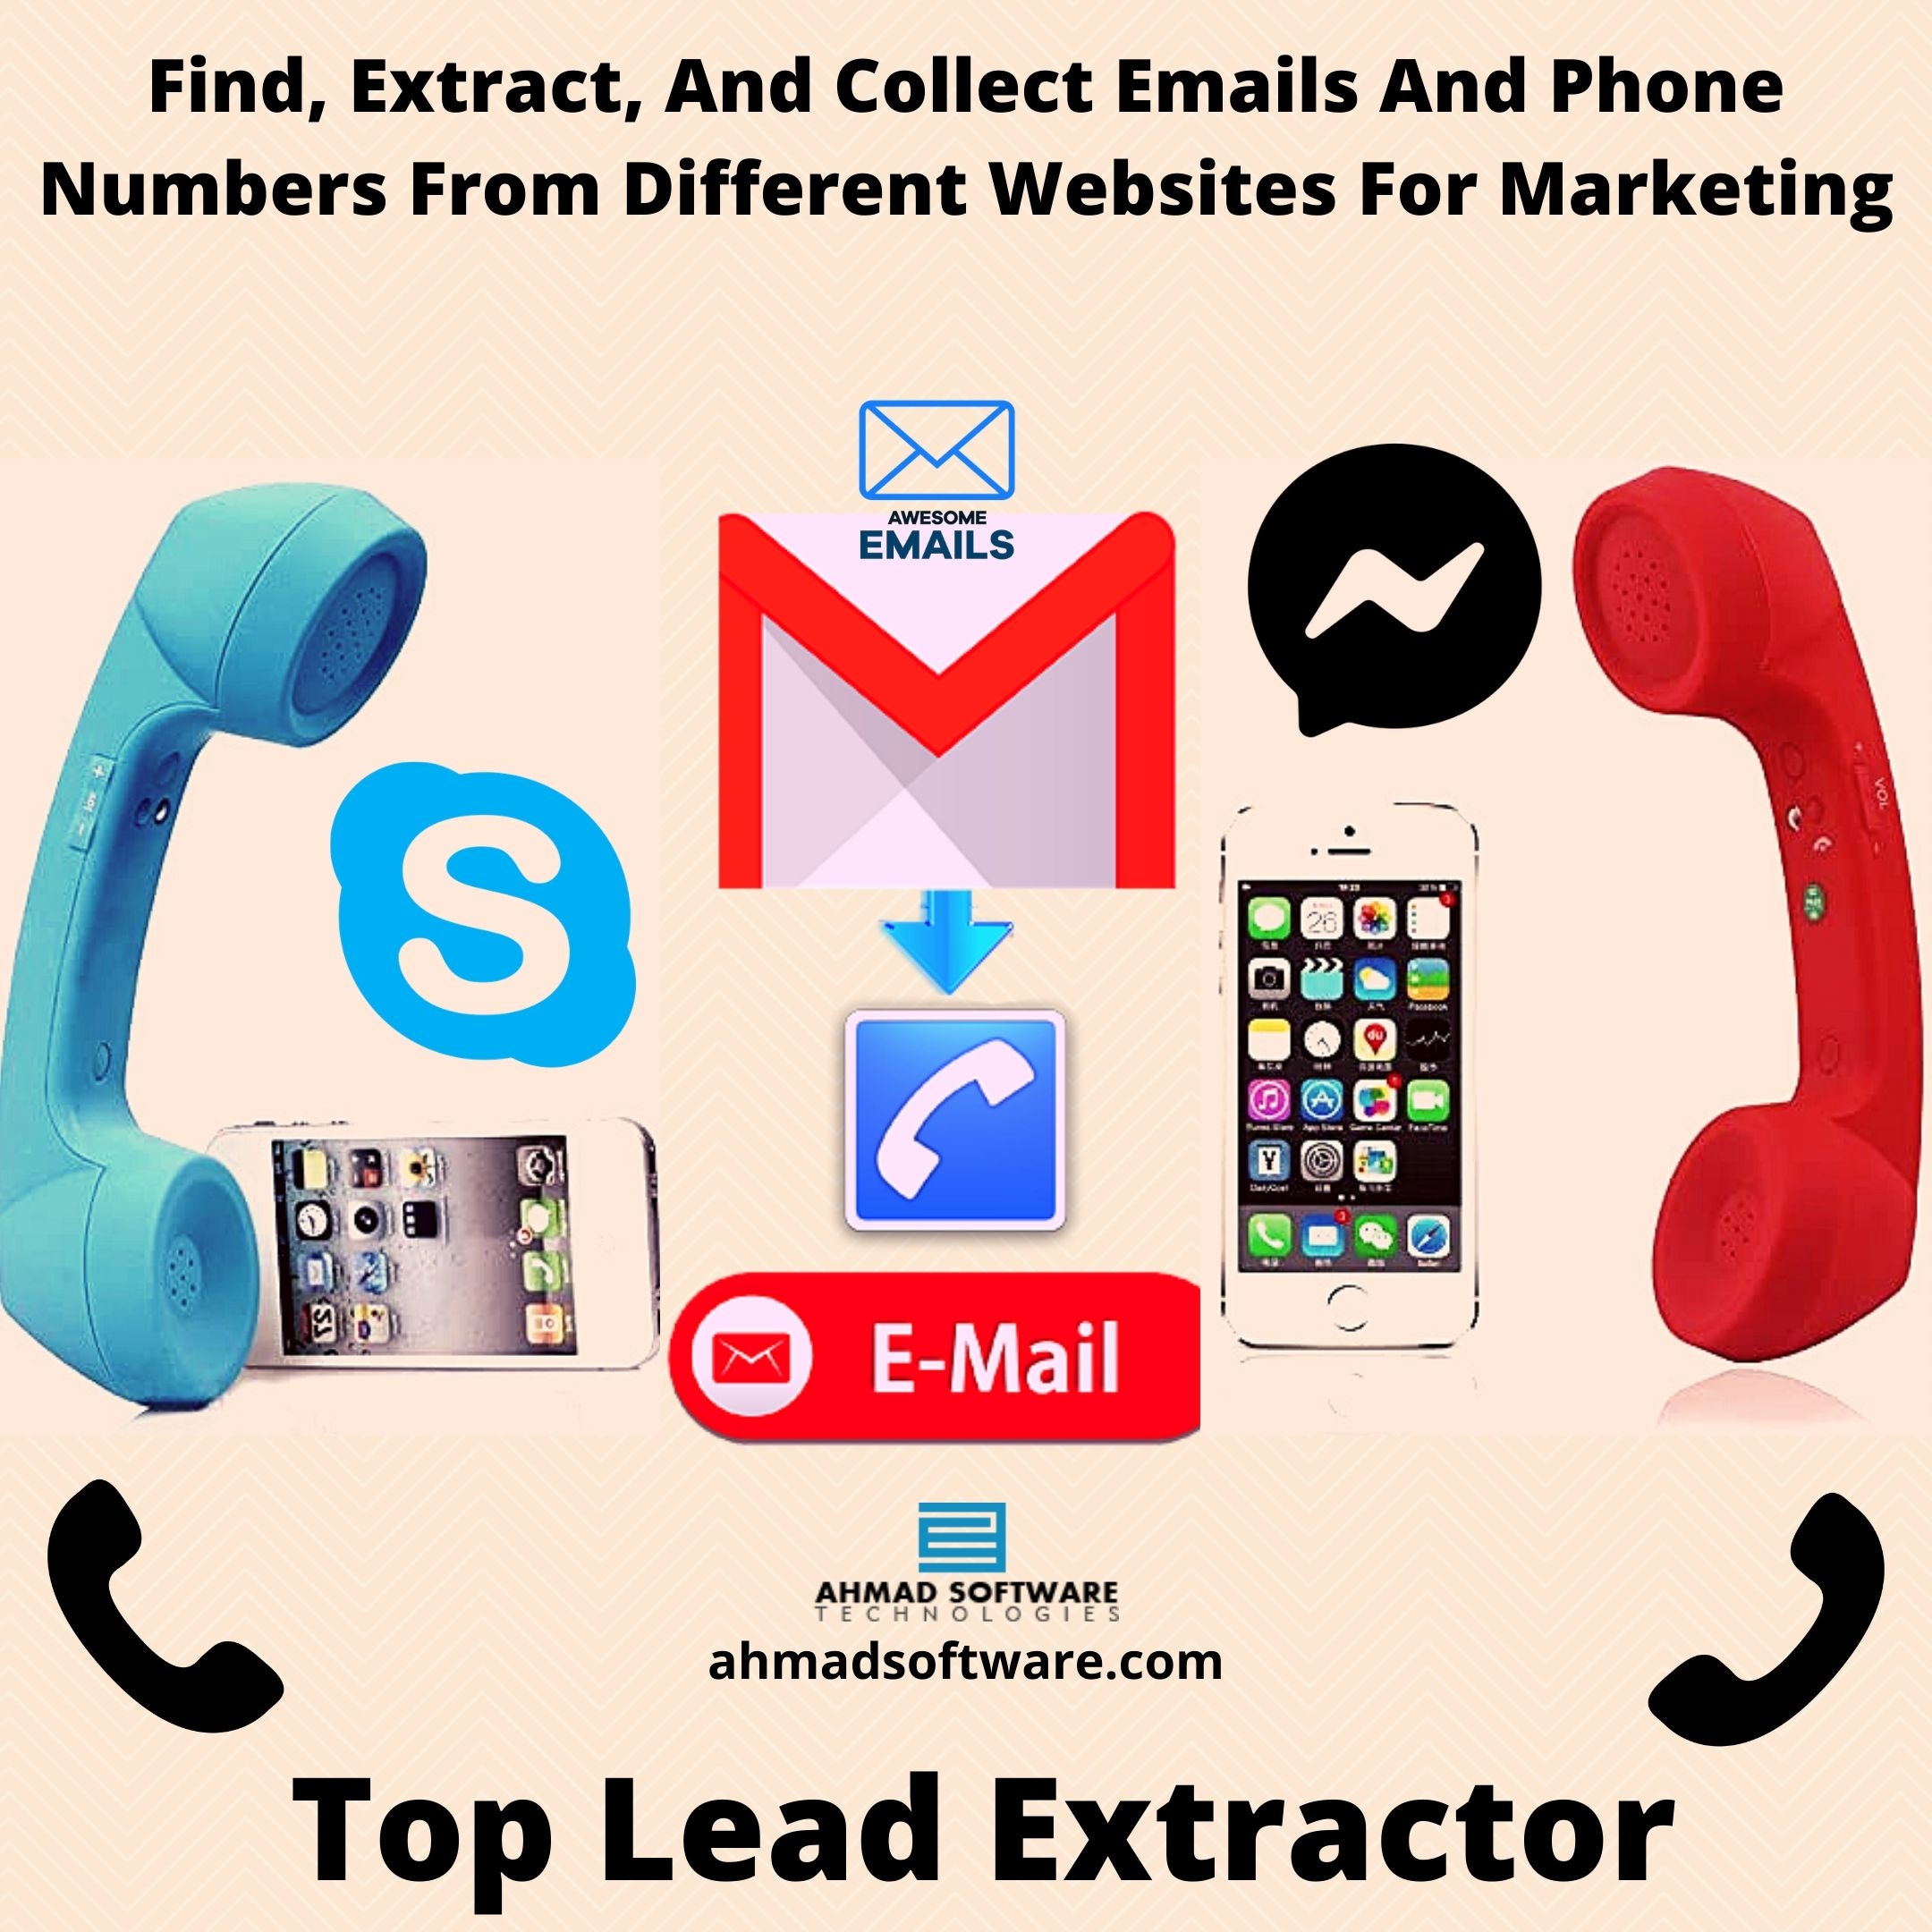 Collect Emails And Phone Numbers From Different Websites For Marketing